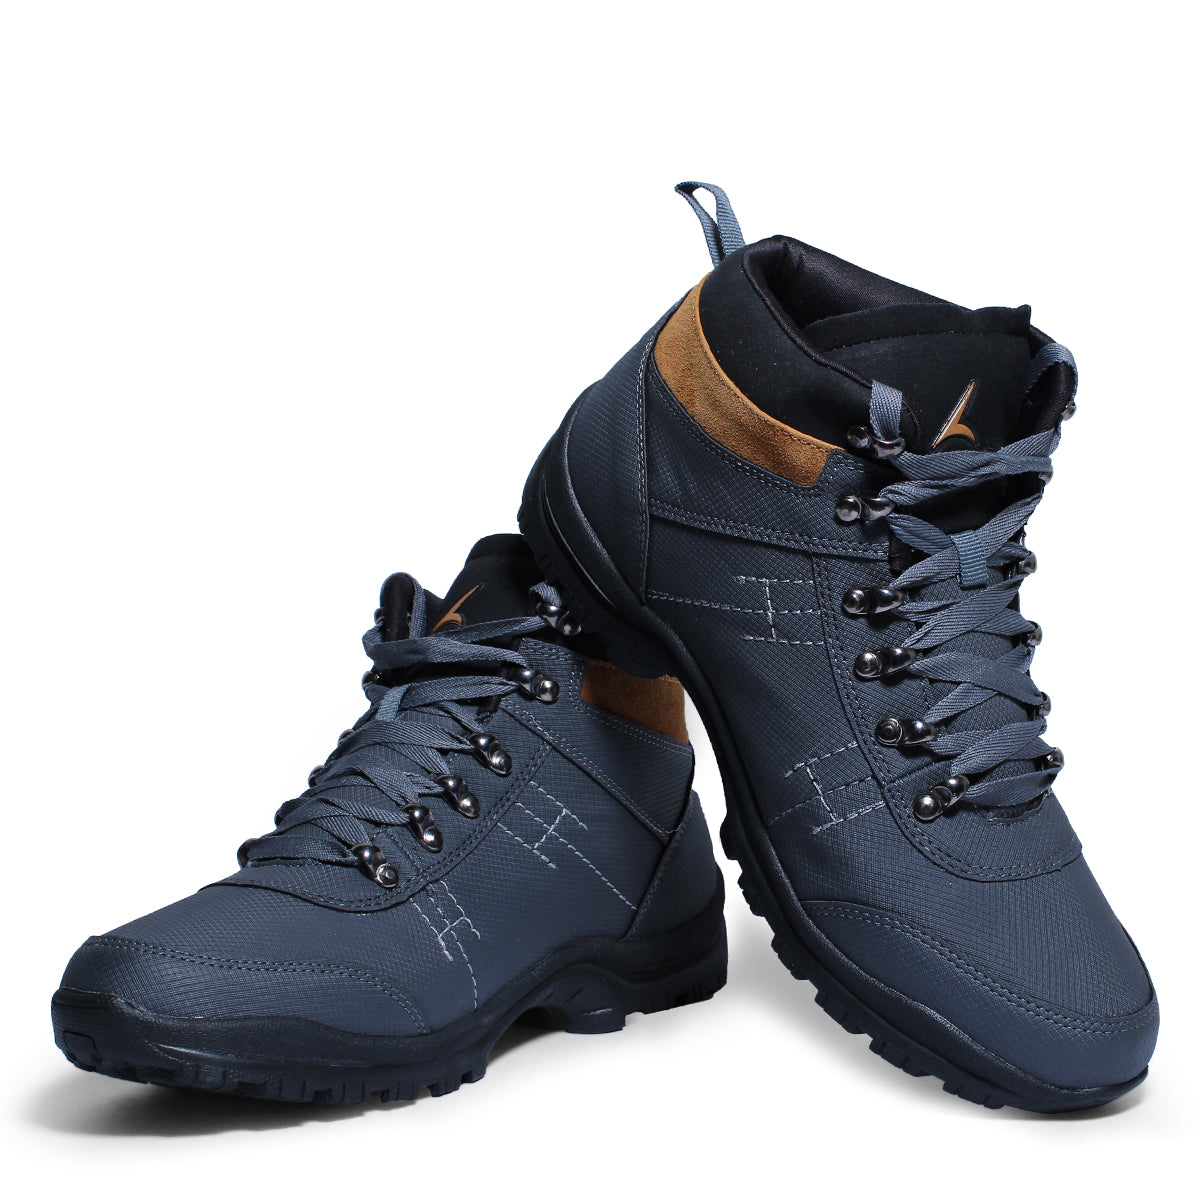 Shoes for Snow, Trekking, Hiking, Running and Walking D GREY 